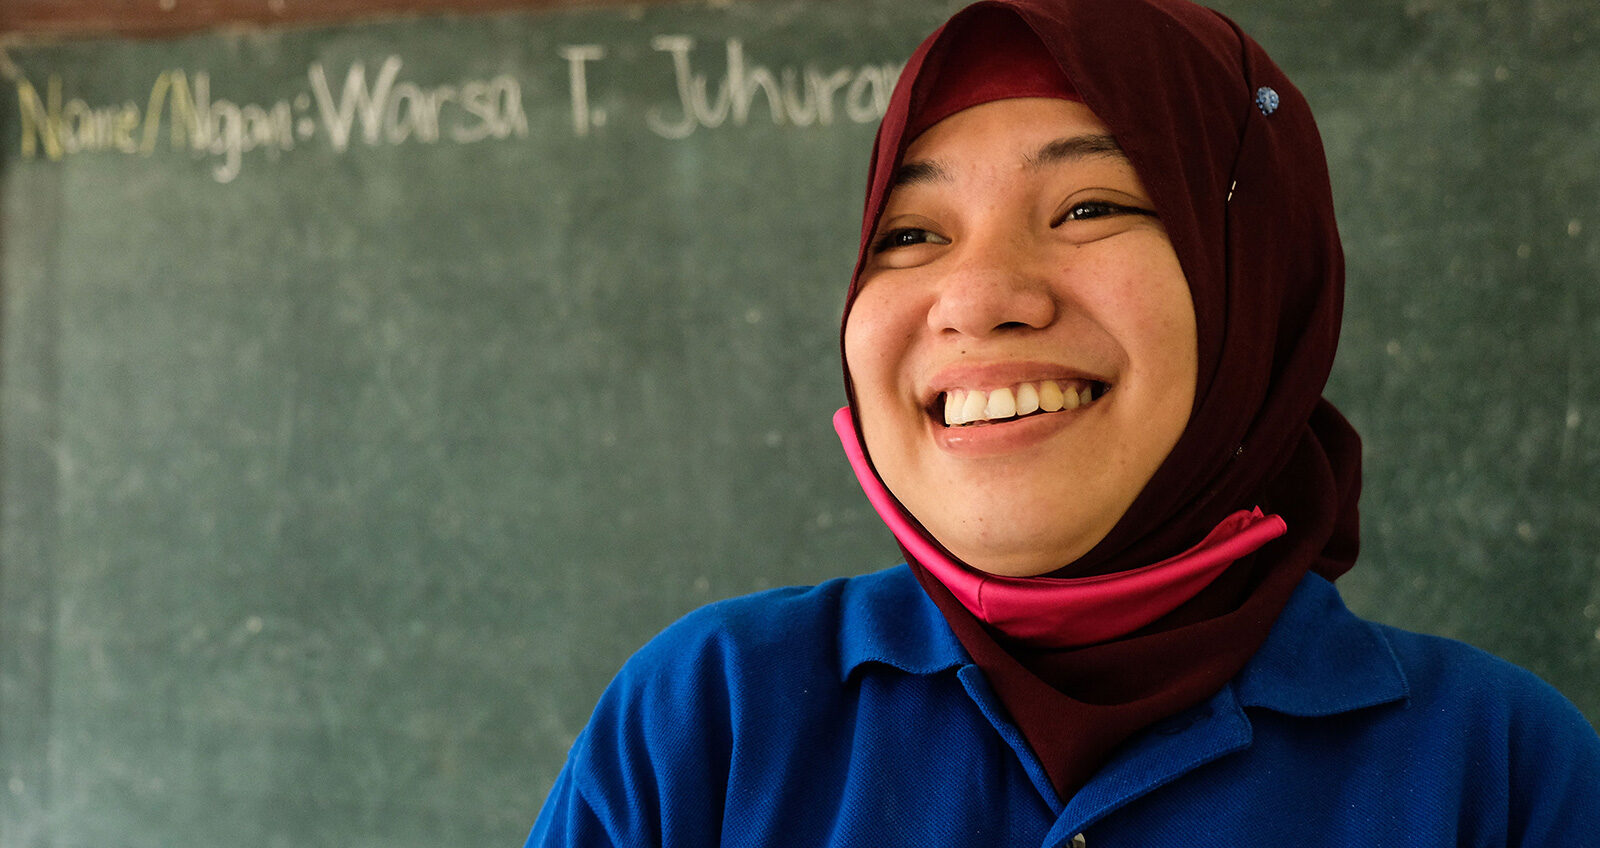 Close up portrait of Warsa, a teacher in a BRAC learning center in the Philippines, smiling in front of a chalkboard